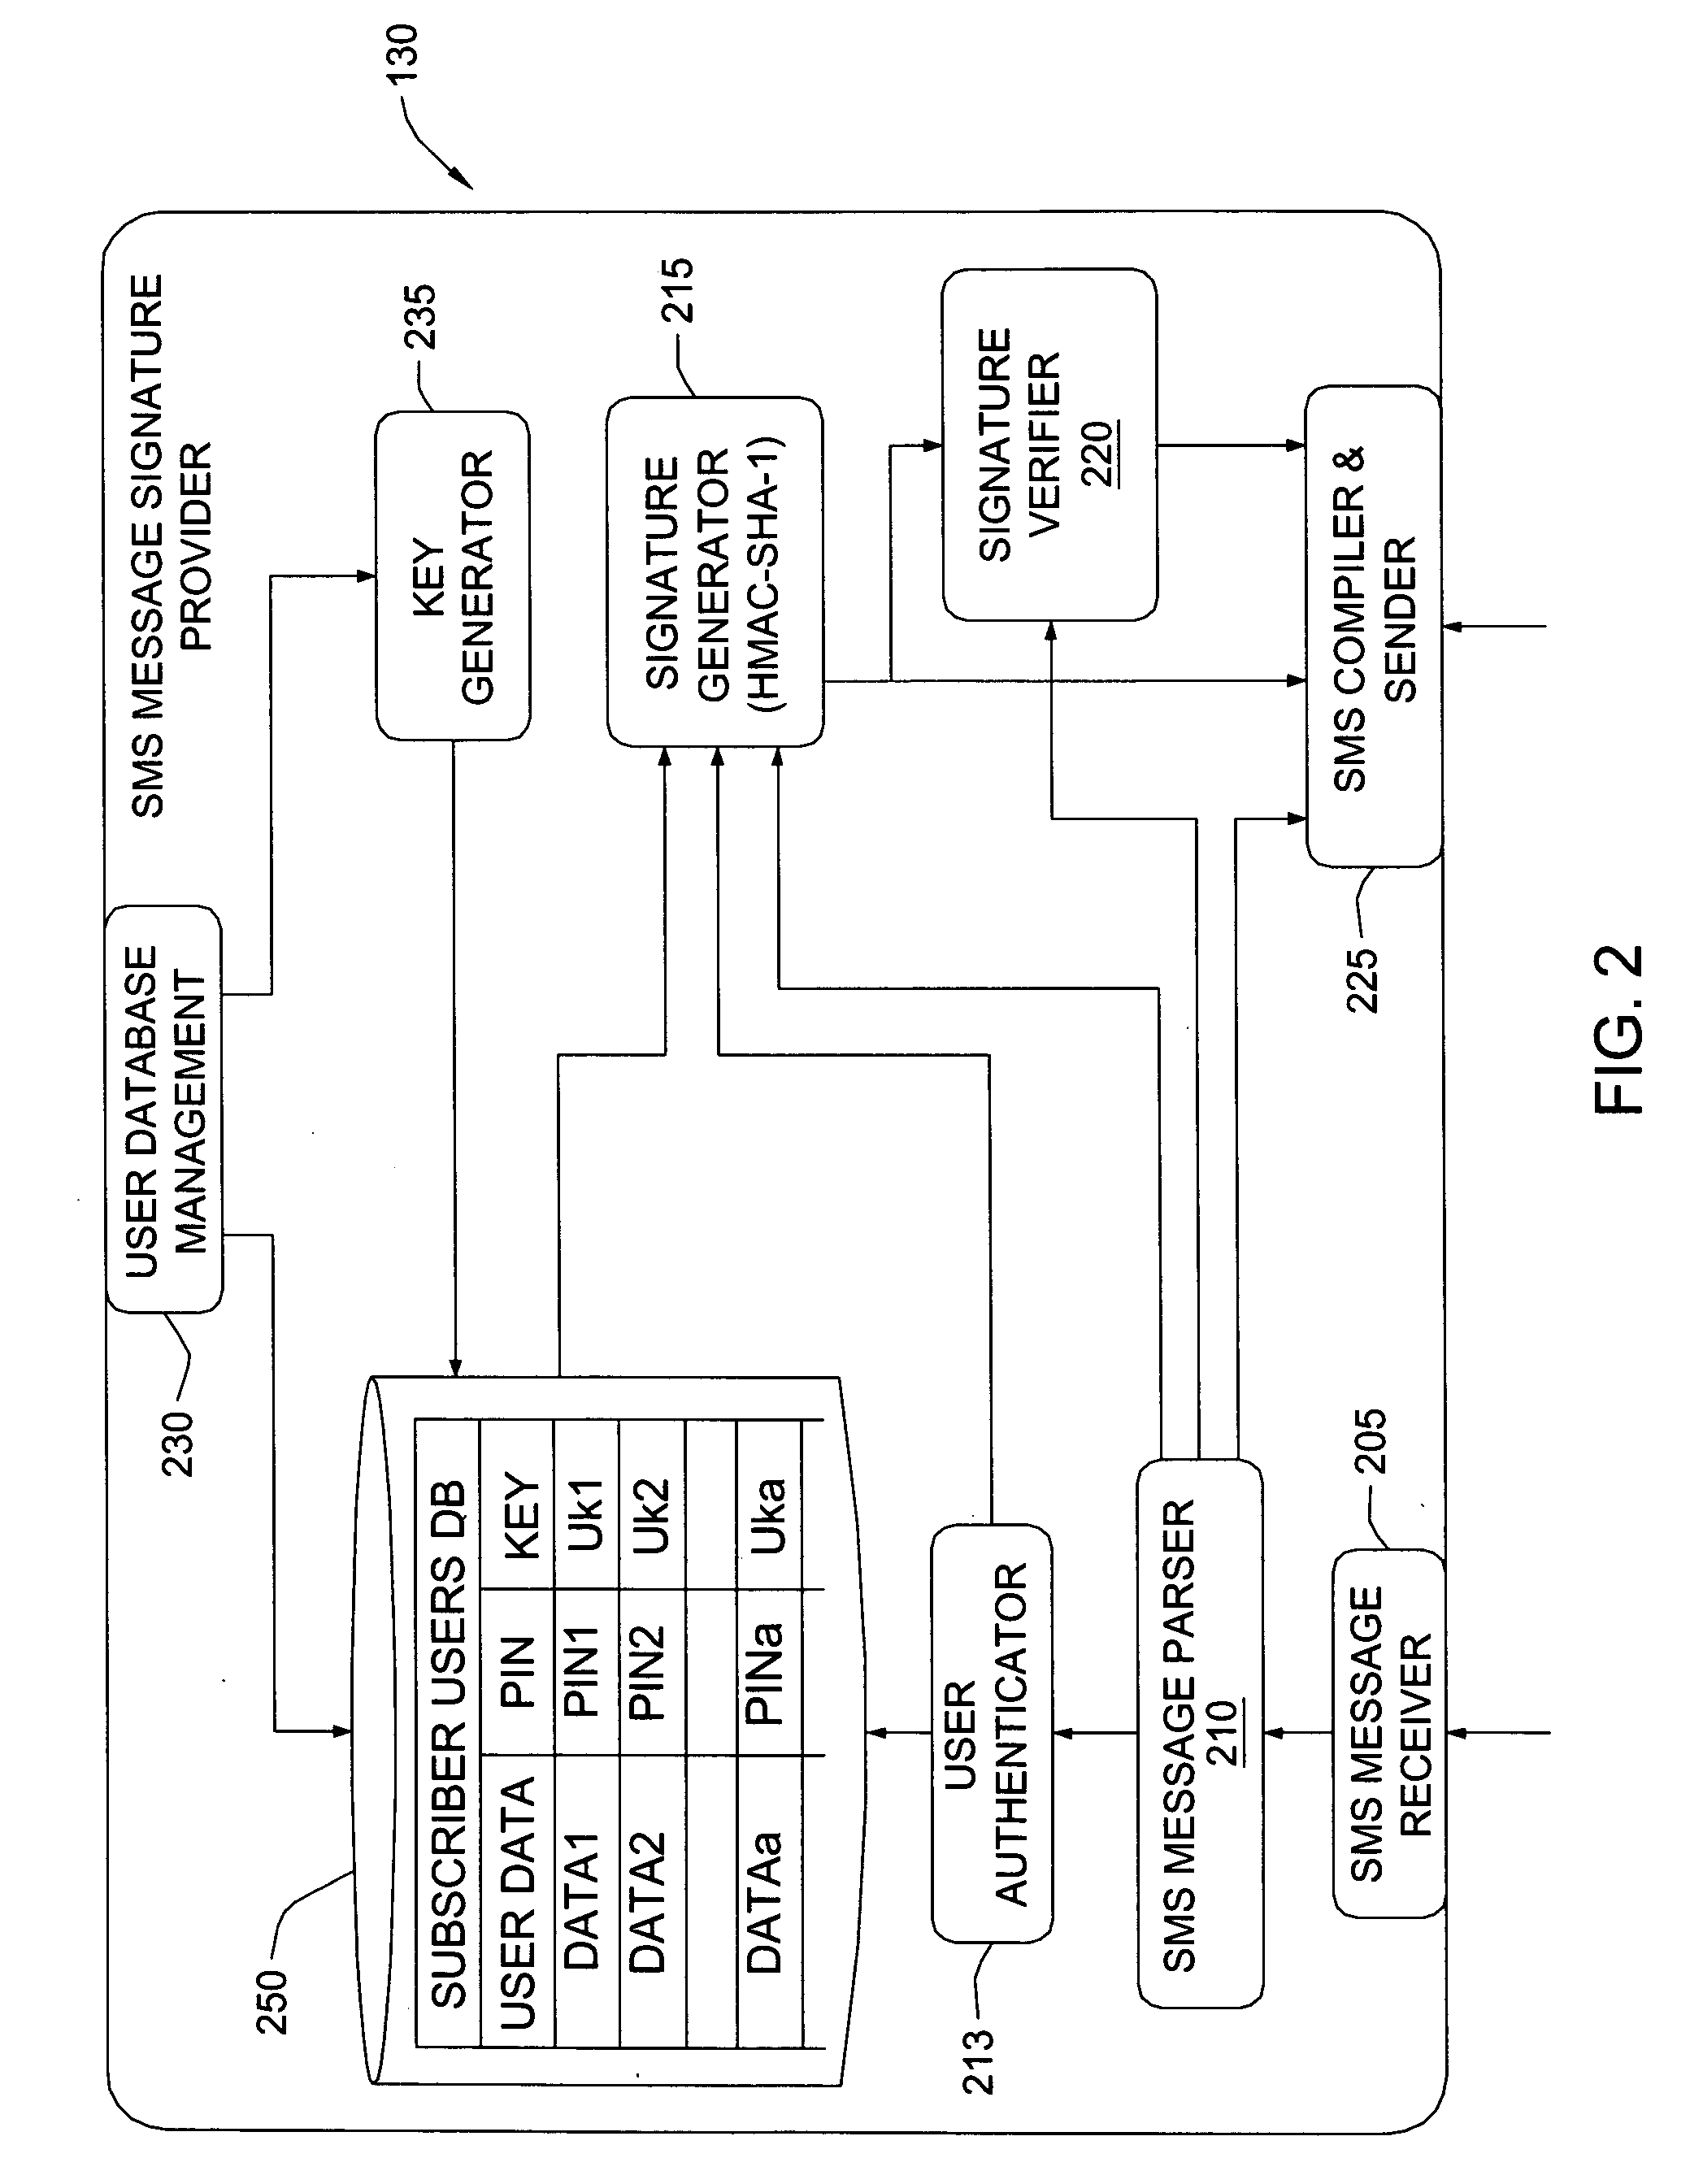 Method and system for authenticating messages exchanged in a communications system